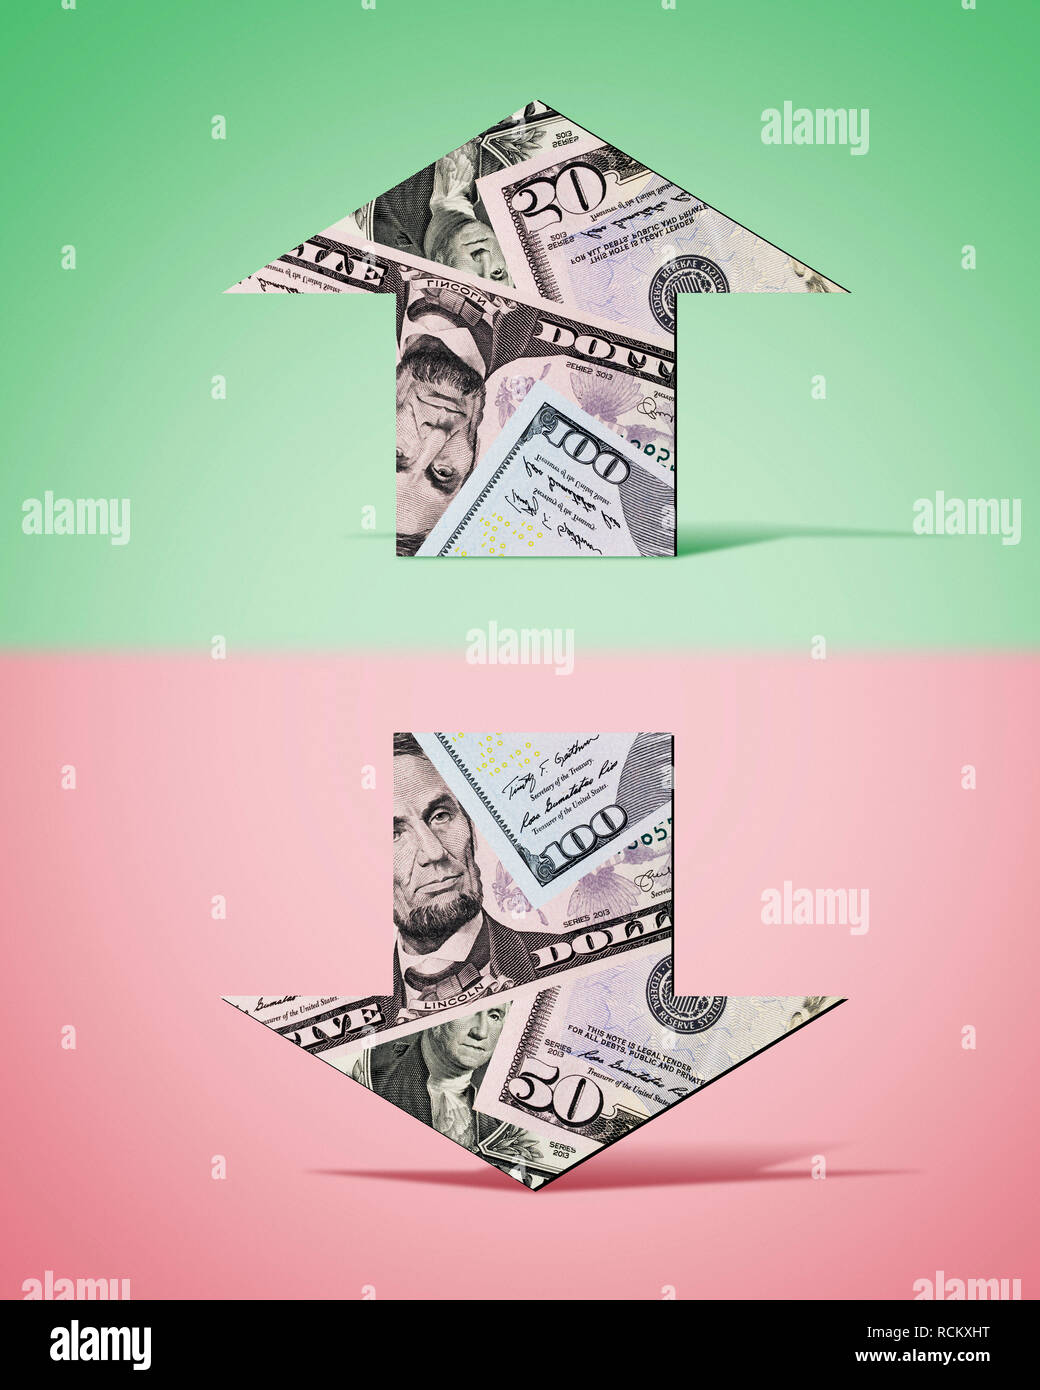 US dollar banknotes in shape of upwards and downwards arrows, computer generated image, pink and green background Stock Photo